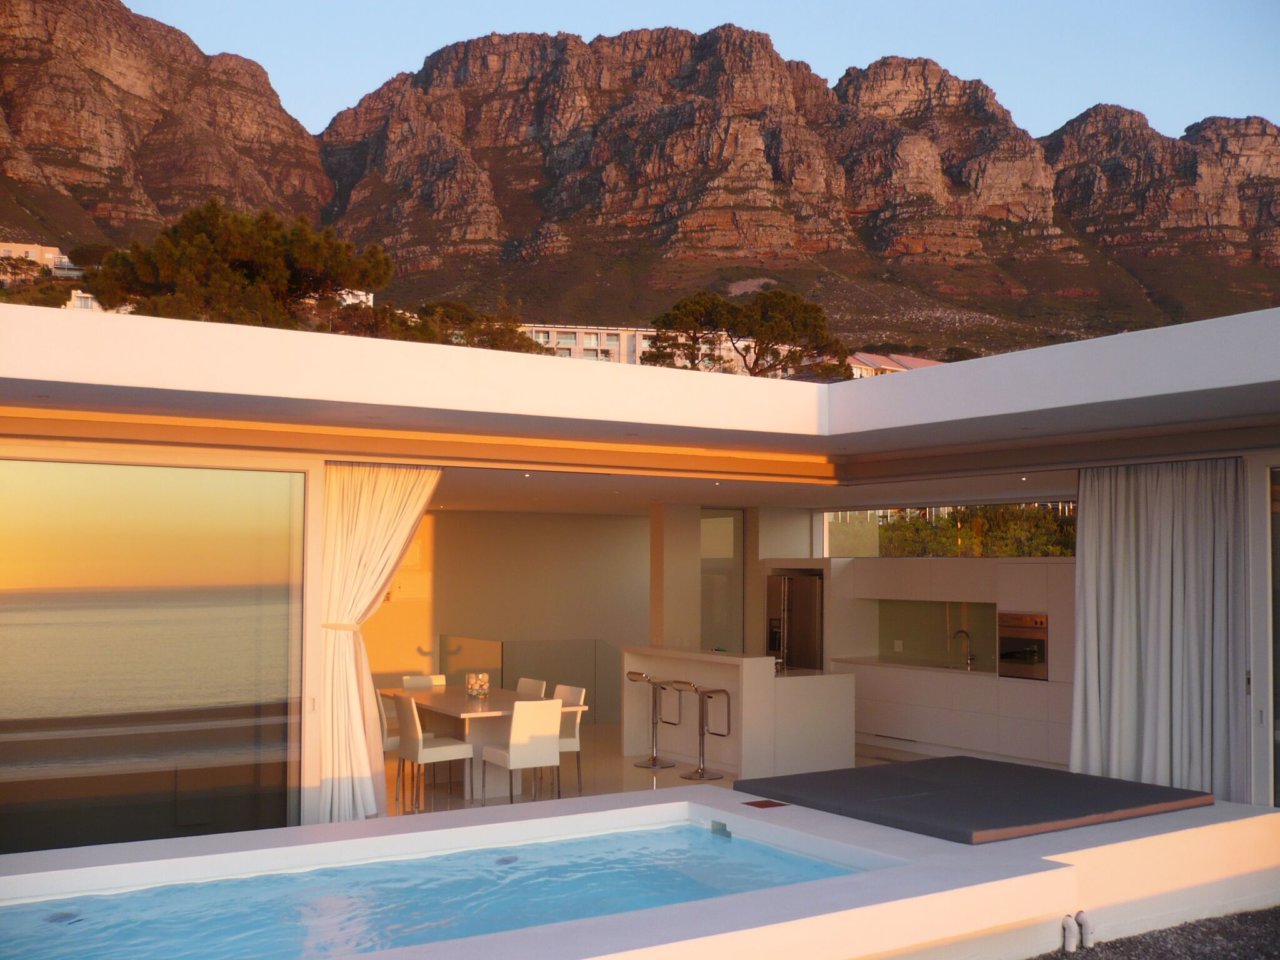 Photo 27 of Aqua Penthouse accommodation in Camps Bay, Cape Town with 2 bedrooms and 2 bathrooms